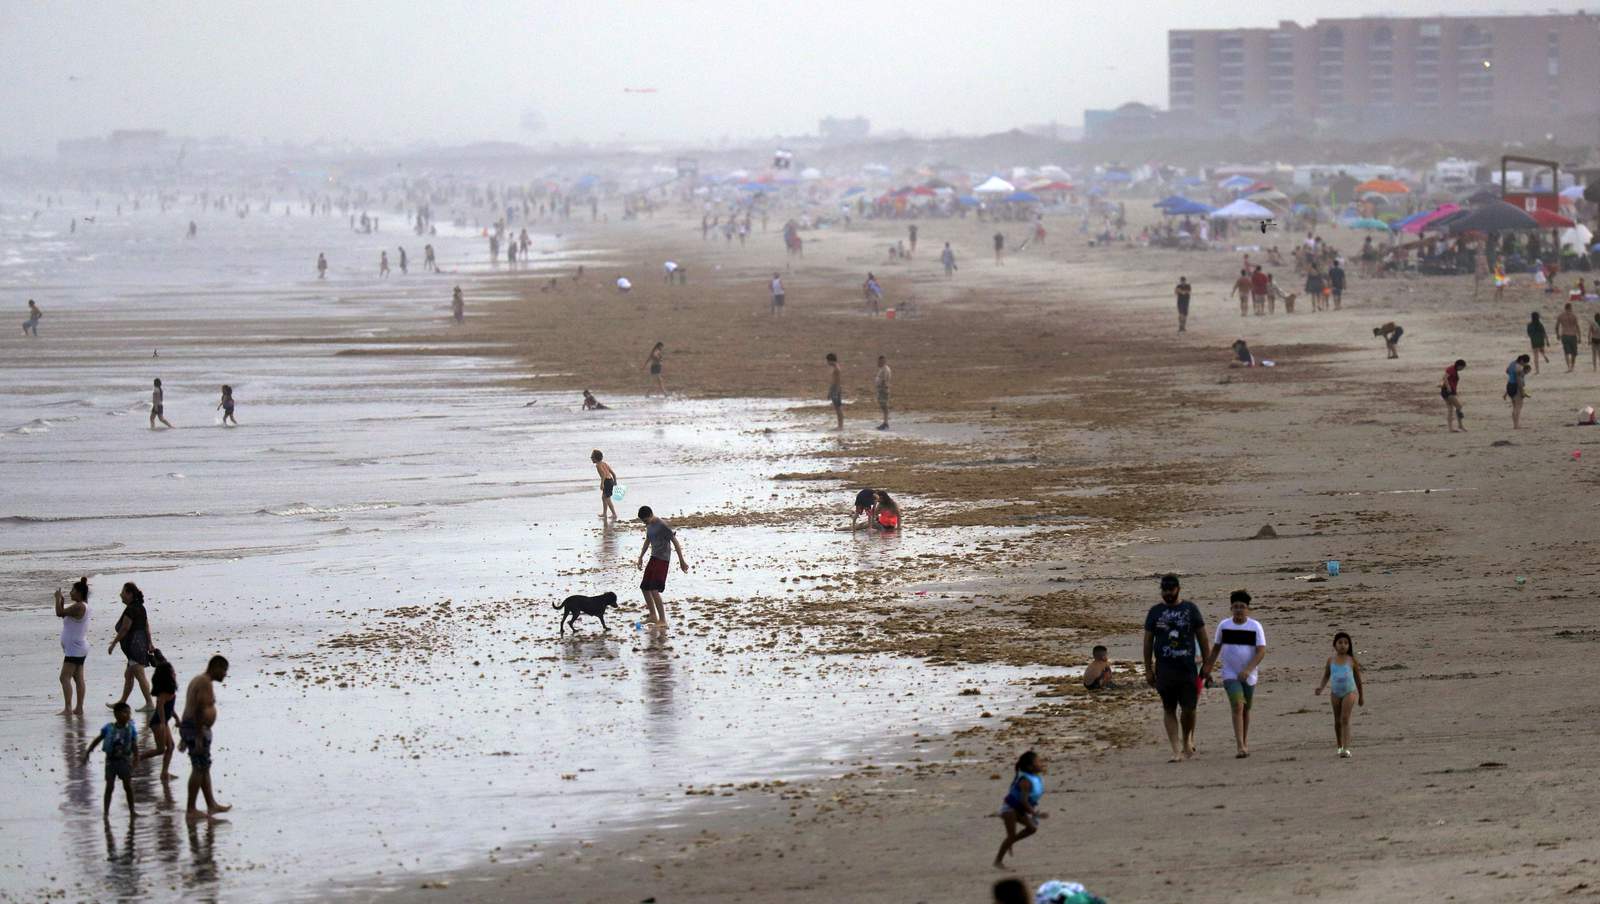 Nueces County order banning vehicles on Corpus Christi, Port A beaches expires, curfew remains